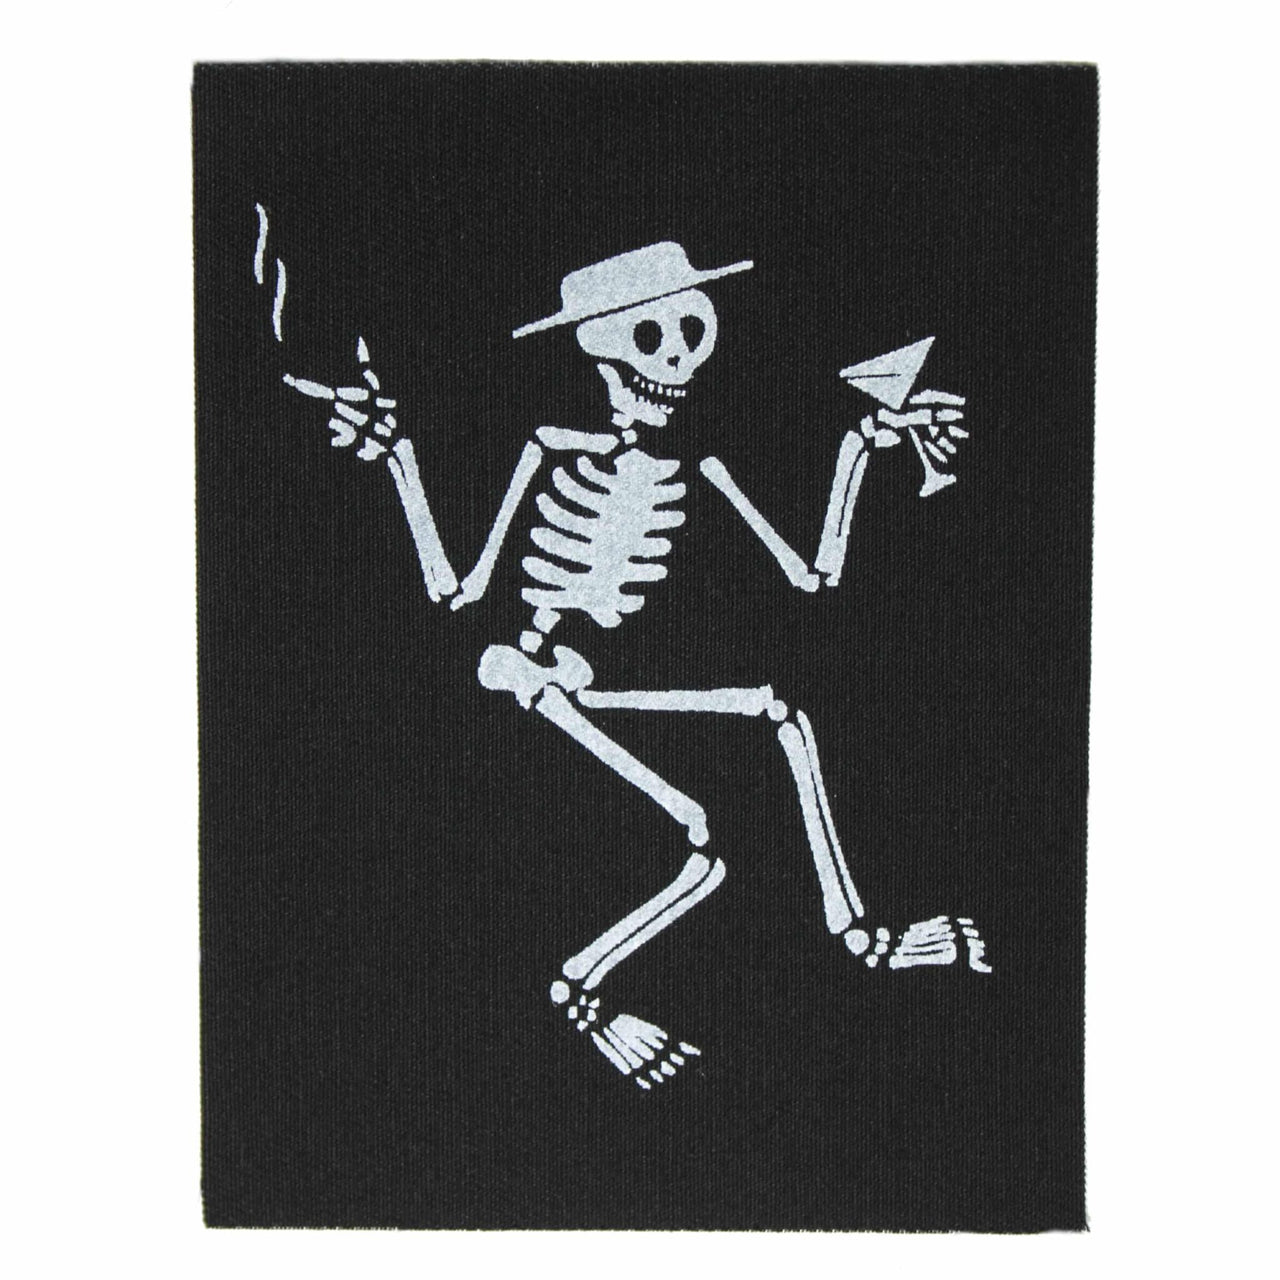 Social Distortion Skelly Cloth Patch